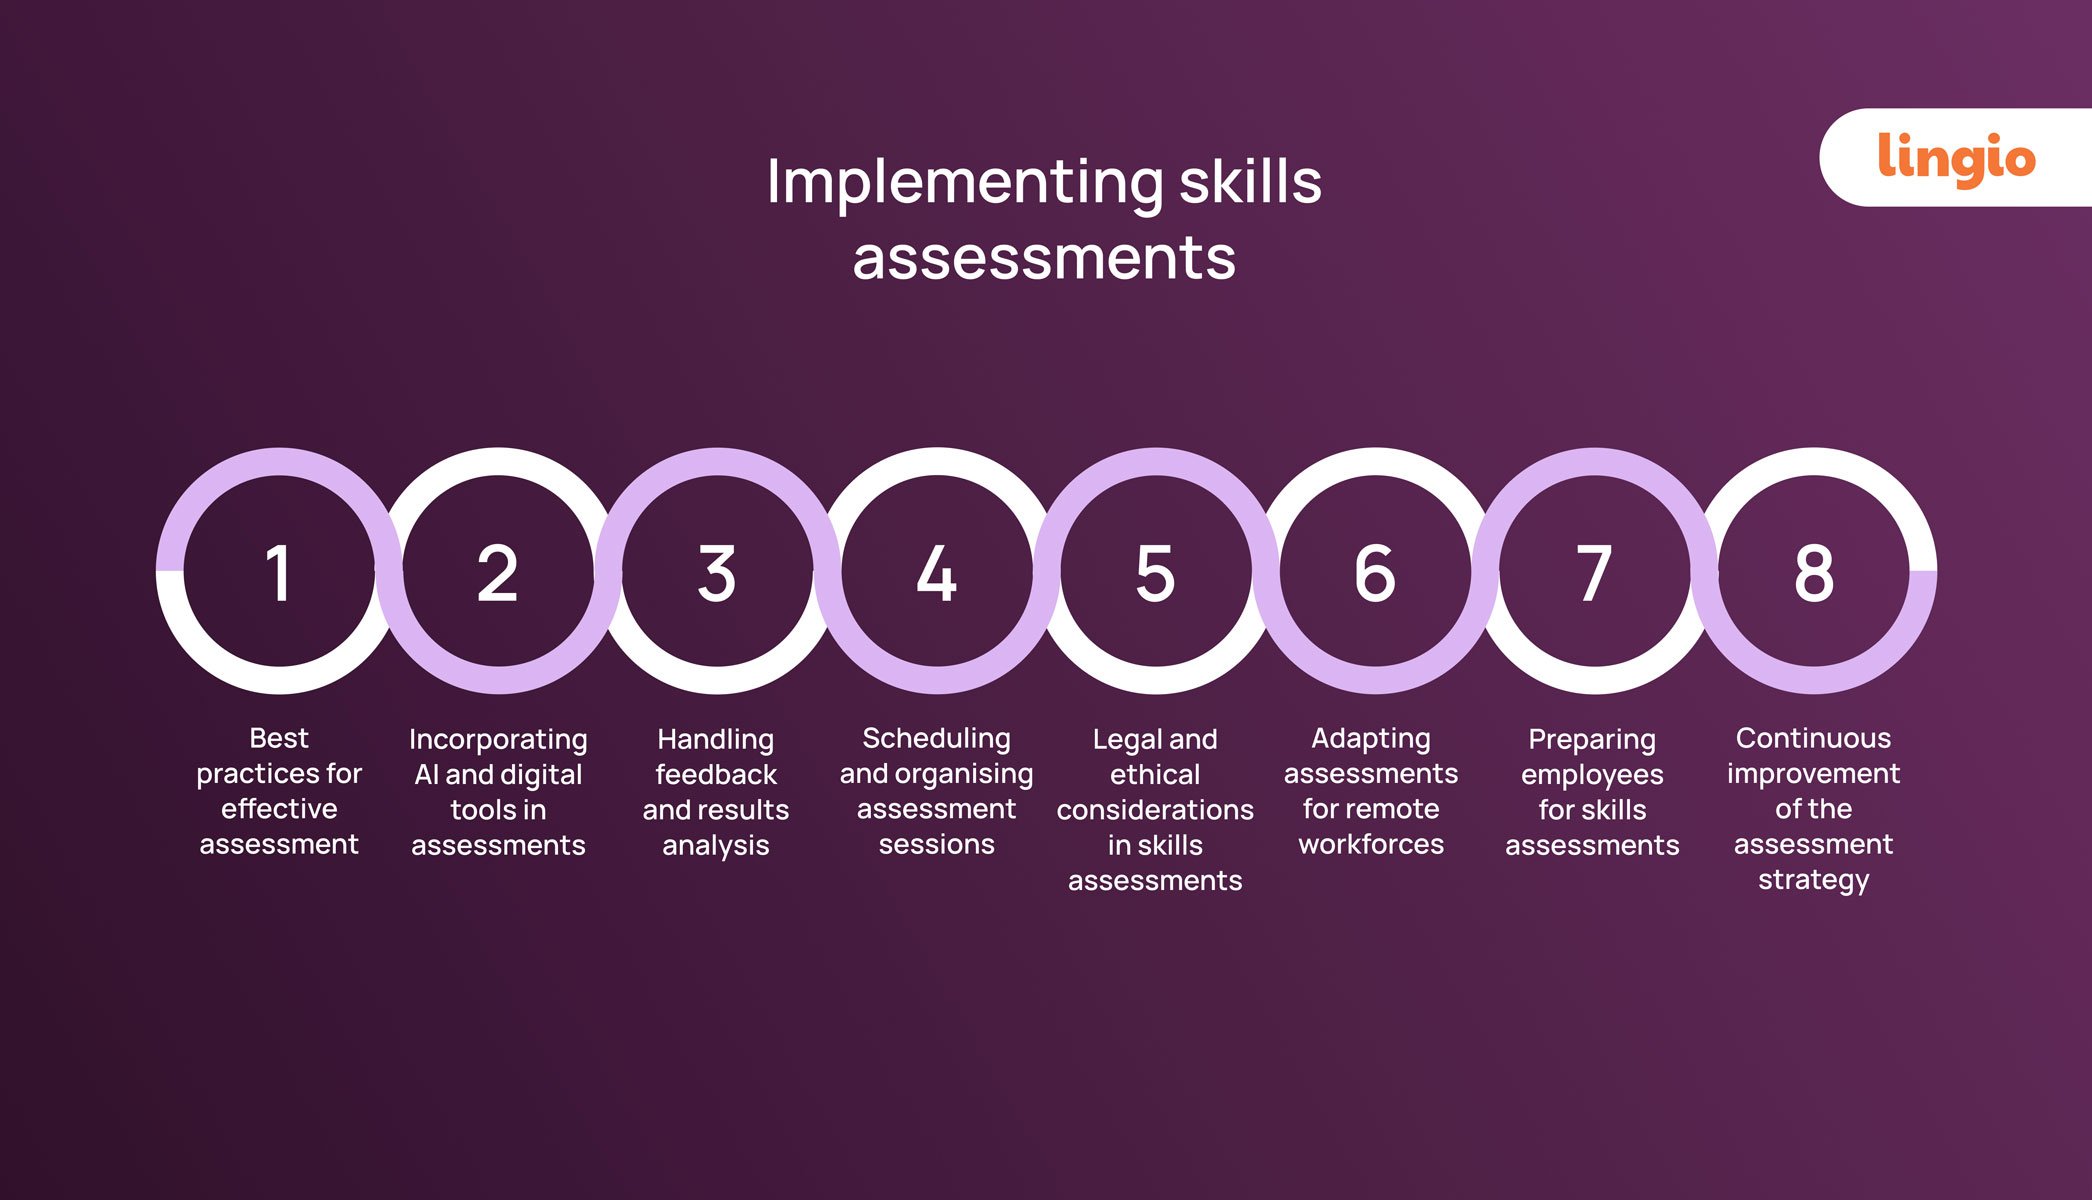 Employee-Skills-Assessment_-Step-By-Step-Guide-Template-IncludedGroup-1000004618